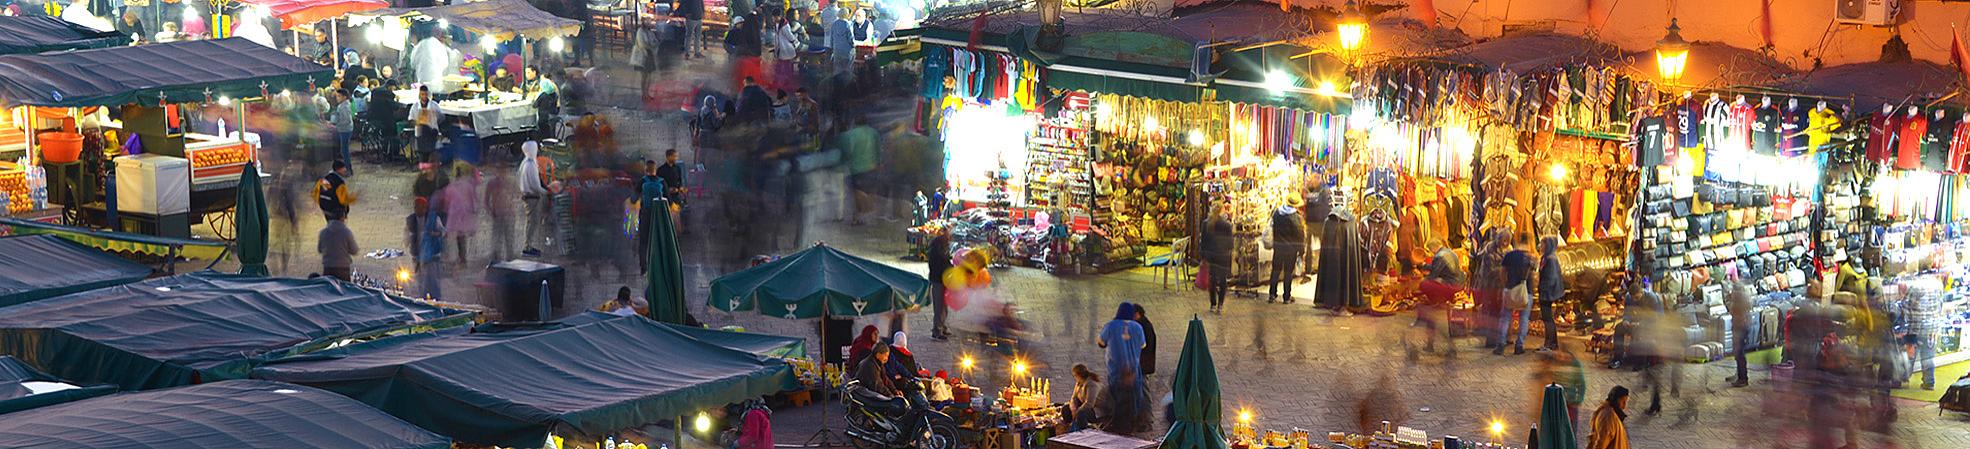 Mystical Marrakesh: Top 8 Tourist Attractions to Visit